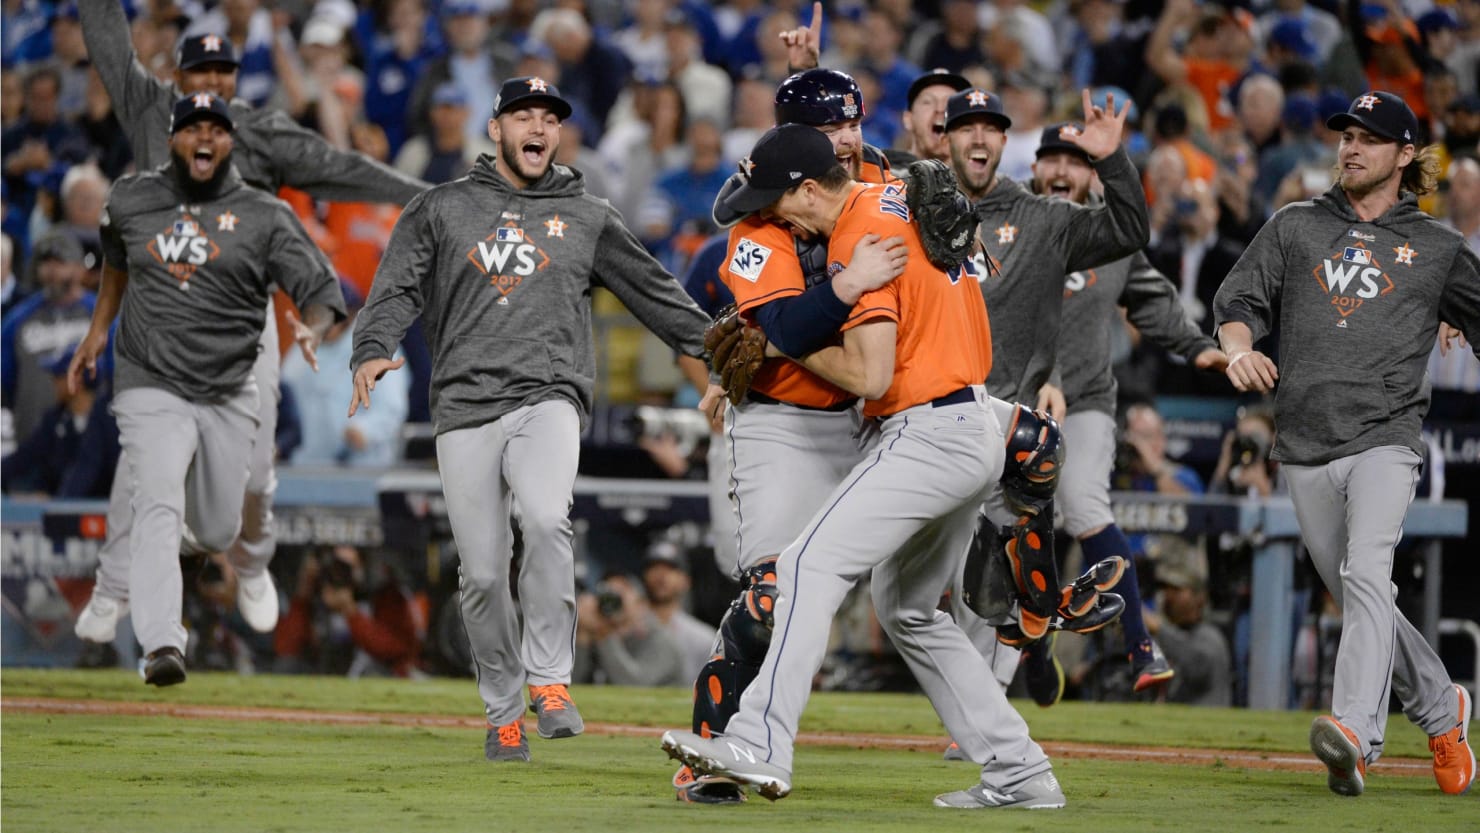 Astros Win First World Series Championship With Game 7 Victory Over Dodgers1480 x 833